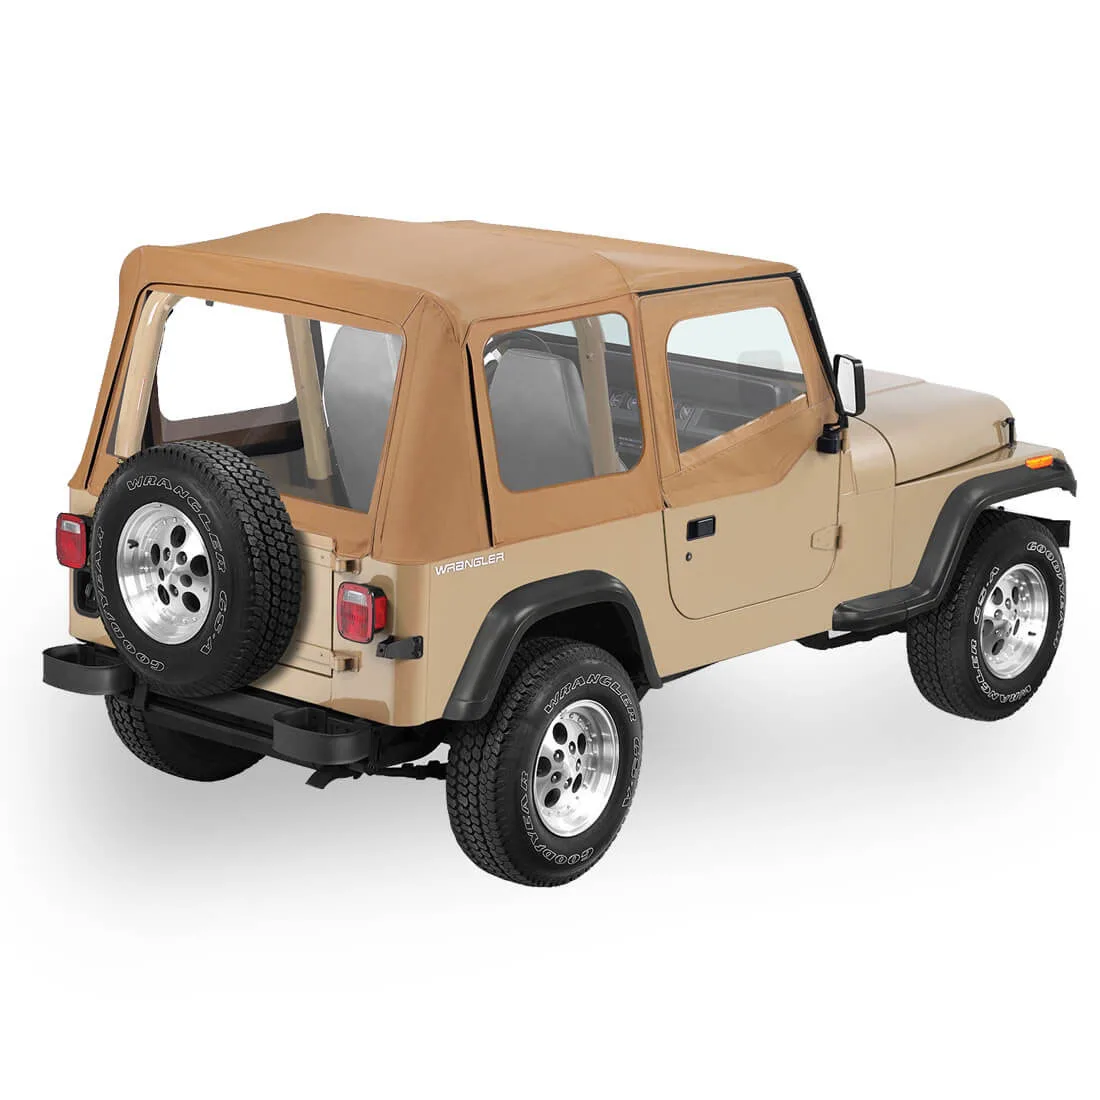 Replay Top Fit For Jeep Wrangler Yj(1988-1995) - Buy Soft Top Fit For Jeep  Wranger Yj(1988-1995),Fit For Jeep Wranger Yj(1988-1995) Soft Top,Soft Top  Product on 